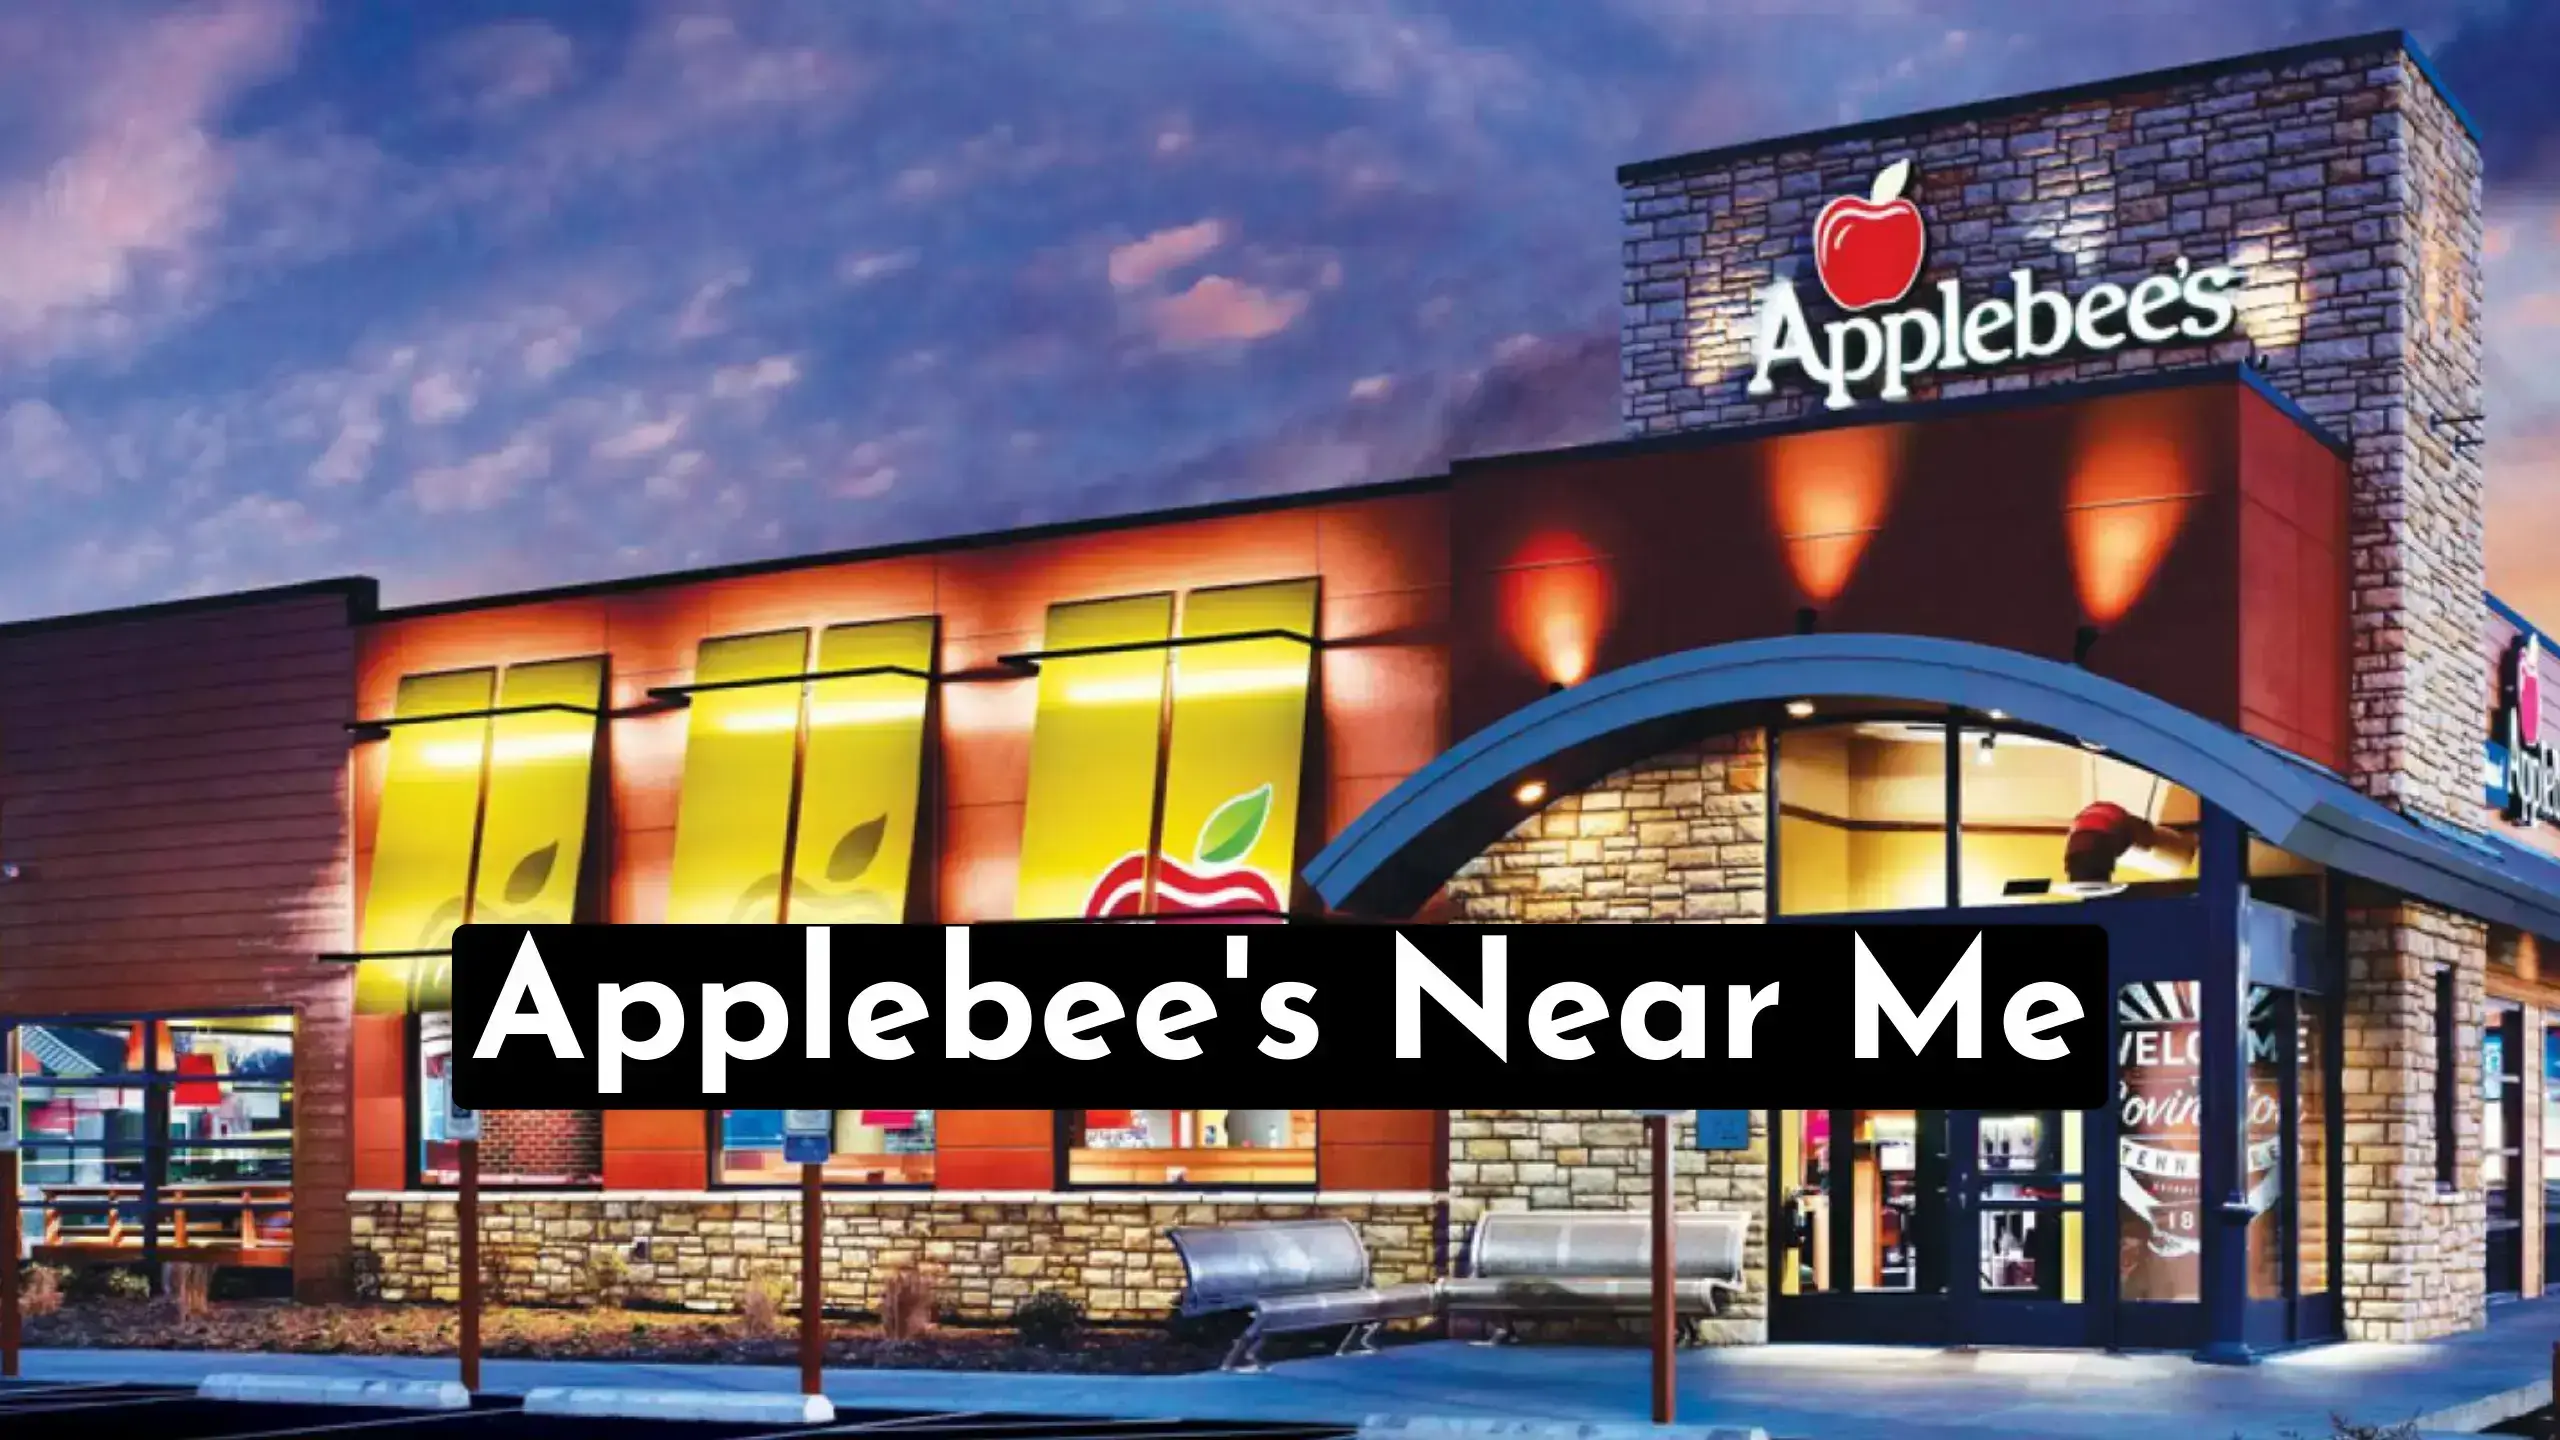 A Quick Guide To Find Applebee's Near Me Locations | Also Discover Applebee's All You Can Eat Options & Money Saving Strategies. | store-hour.com